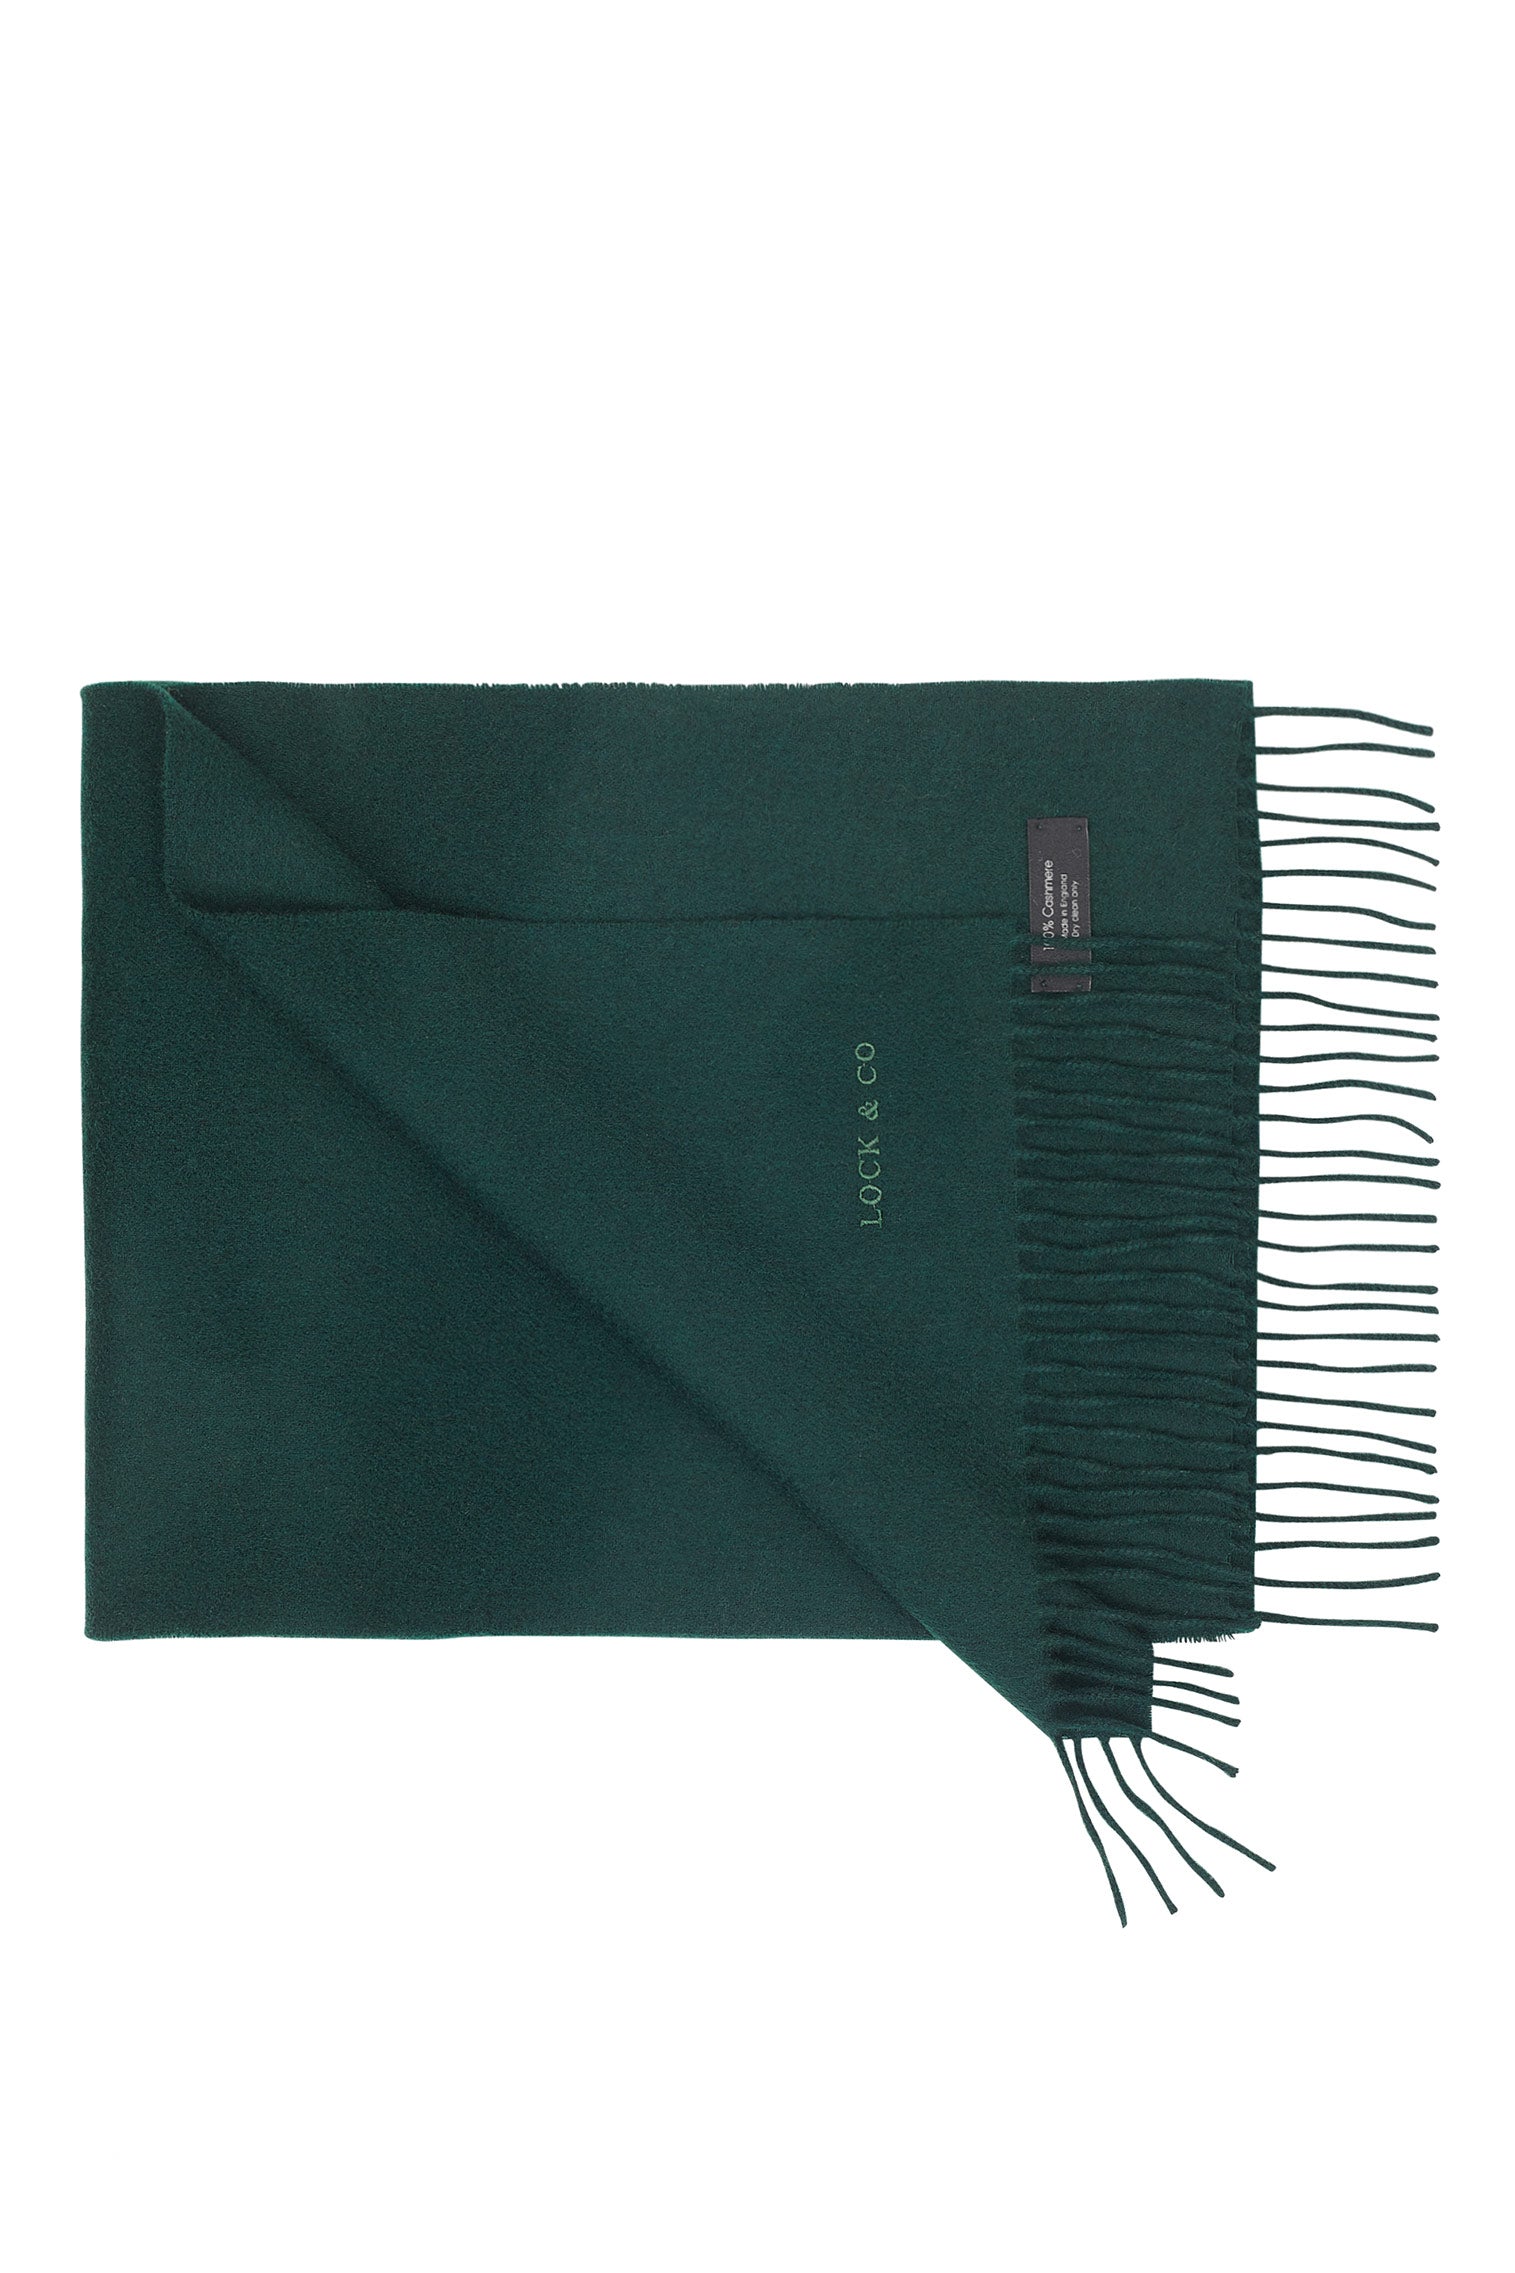 Cashmere Scarf - Valentines Day Gift Ideas - Lock & Co. Hatters London UK